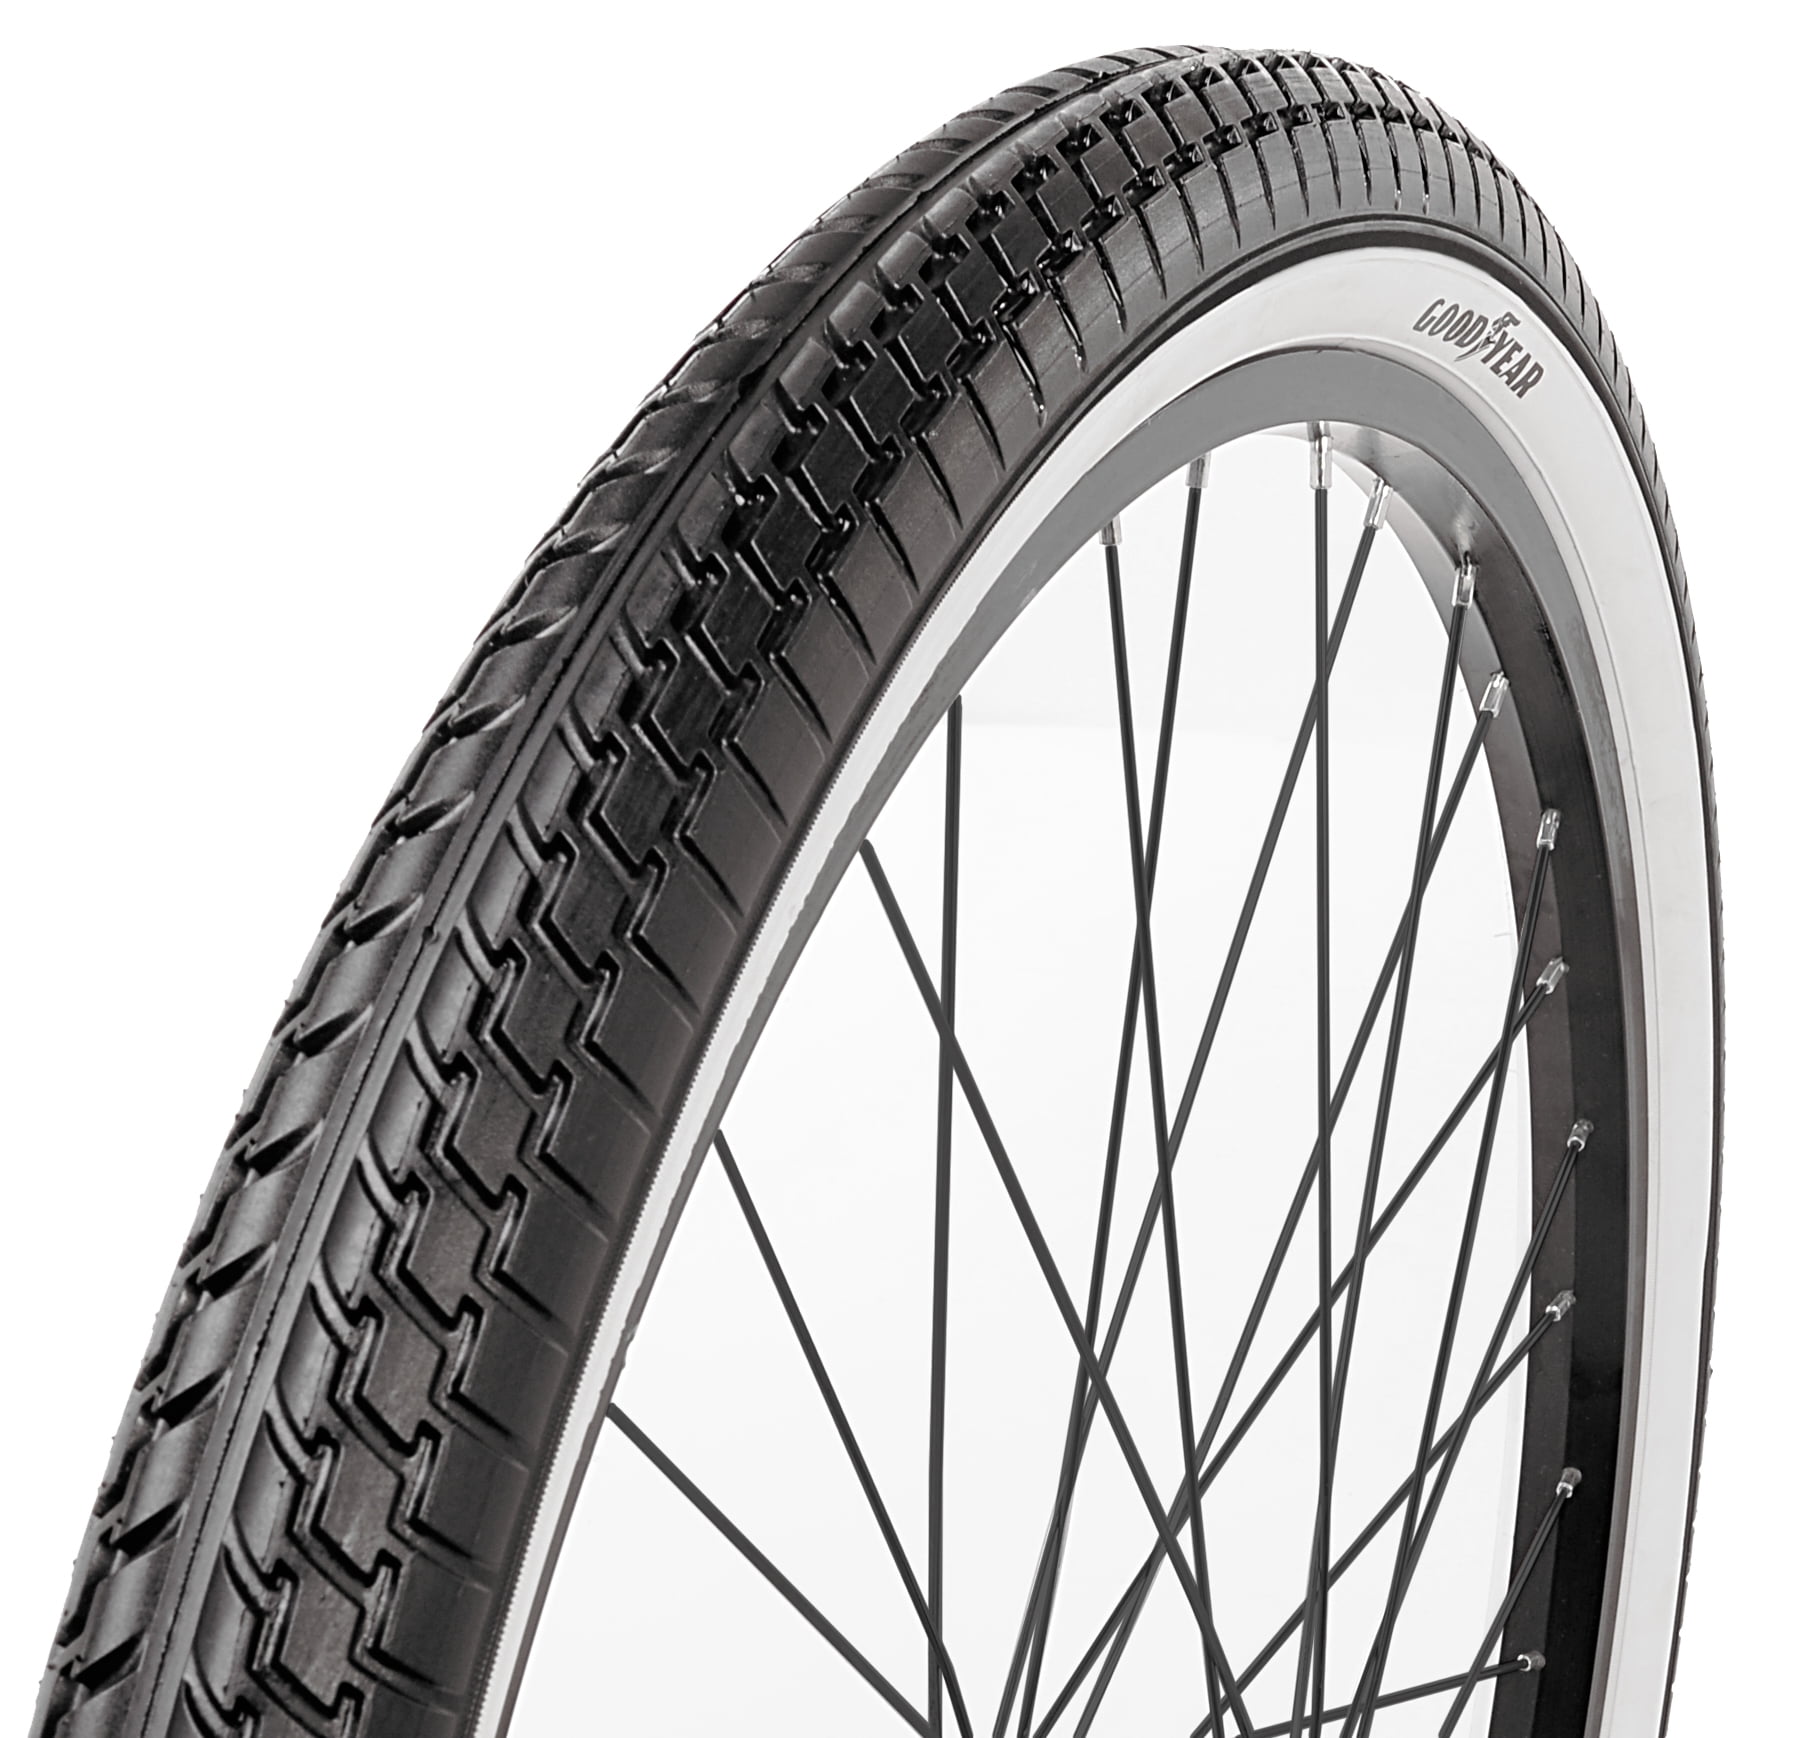 20 In Black x 1.75-2.25 In. Bell Air Guard Freestyle BMX Bike Tire 7115510 for sale online 